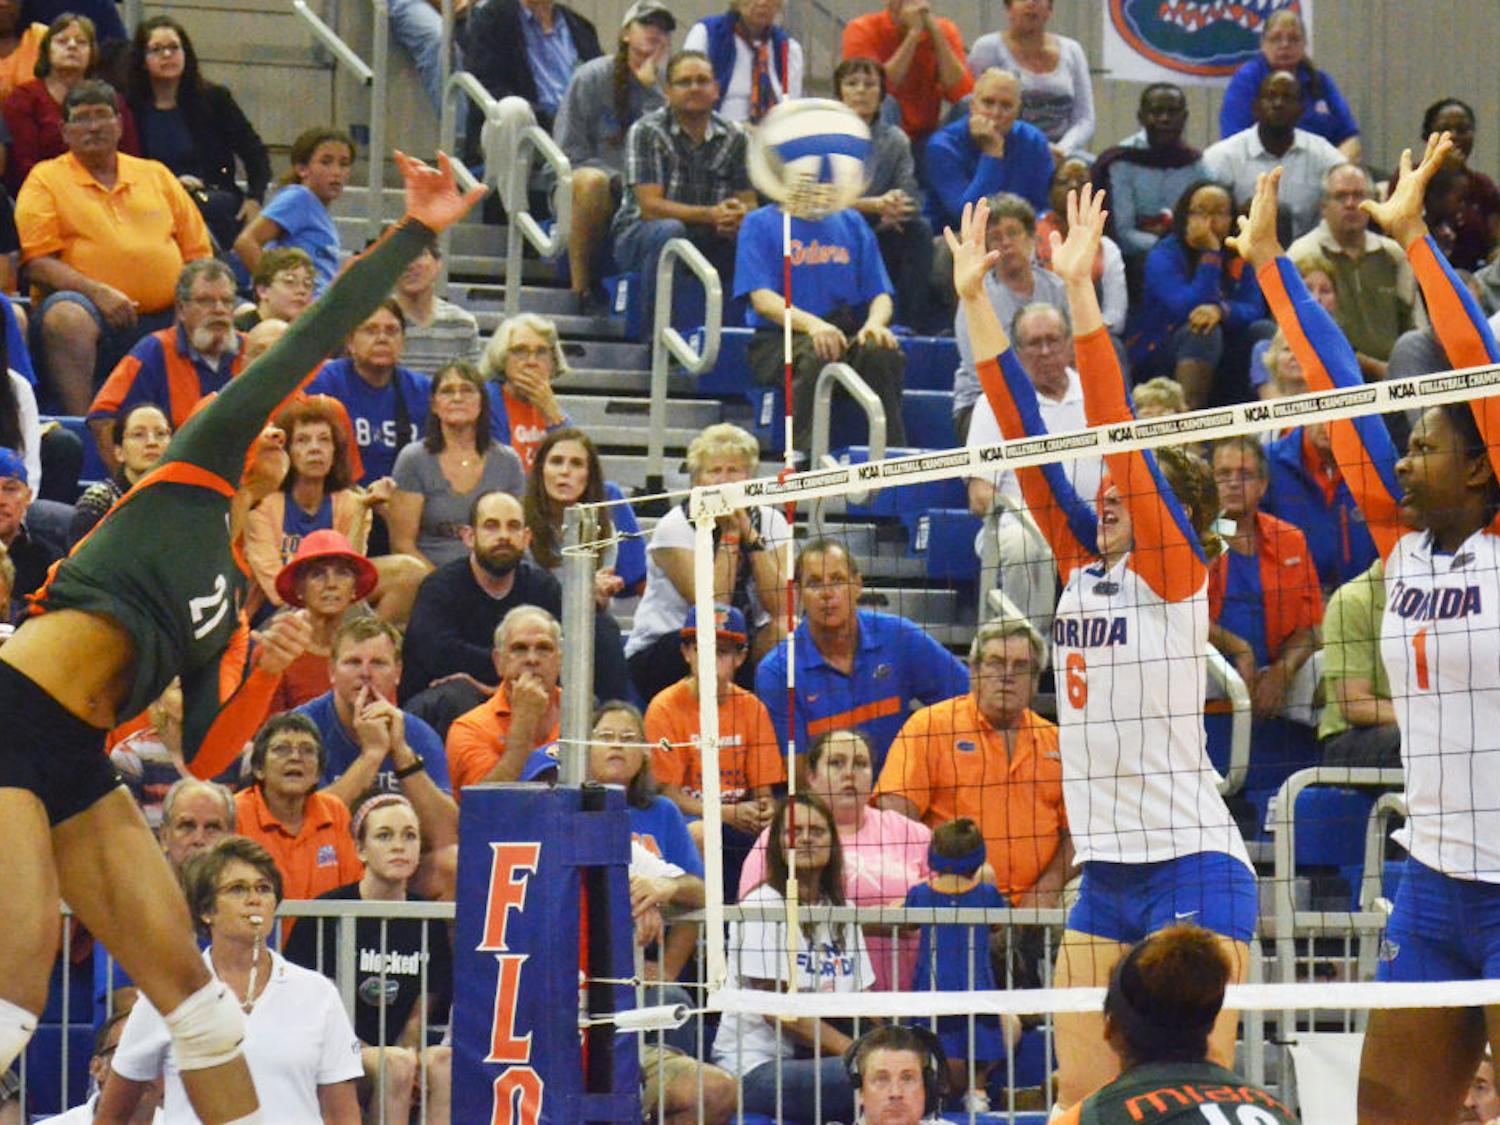 Mackenzie Dagostino (6) and Rhamat Alhassan (1) attempt to block a kill attempt&nbsp;during No. 8 seed Florida's 3-1 win against Miami in the second round of the NCAA Tournament on Saturday in the O'Connell Center.